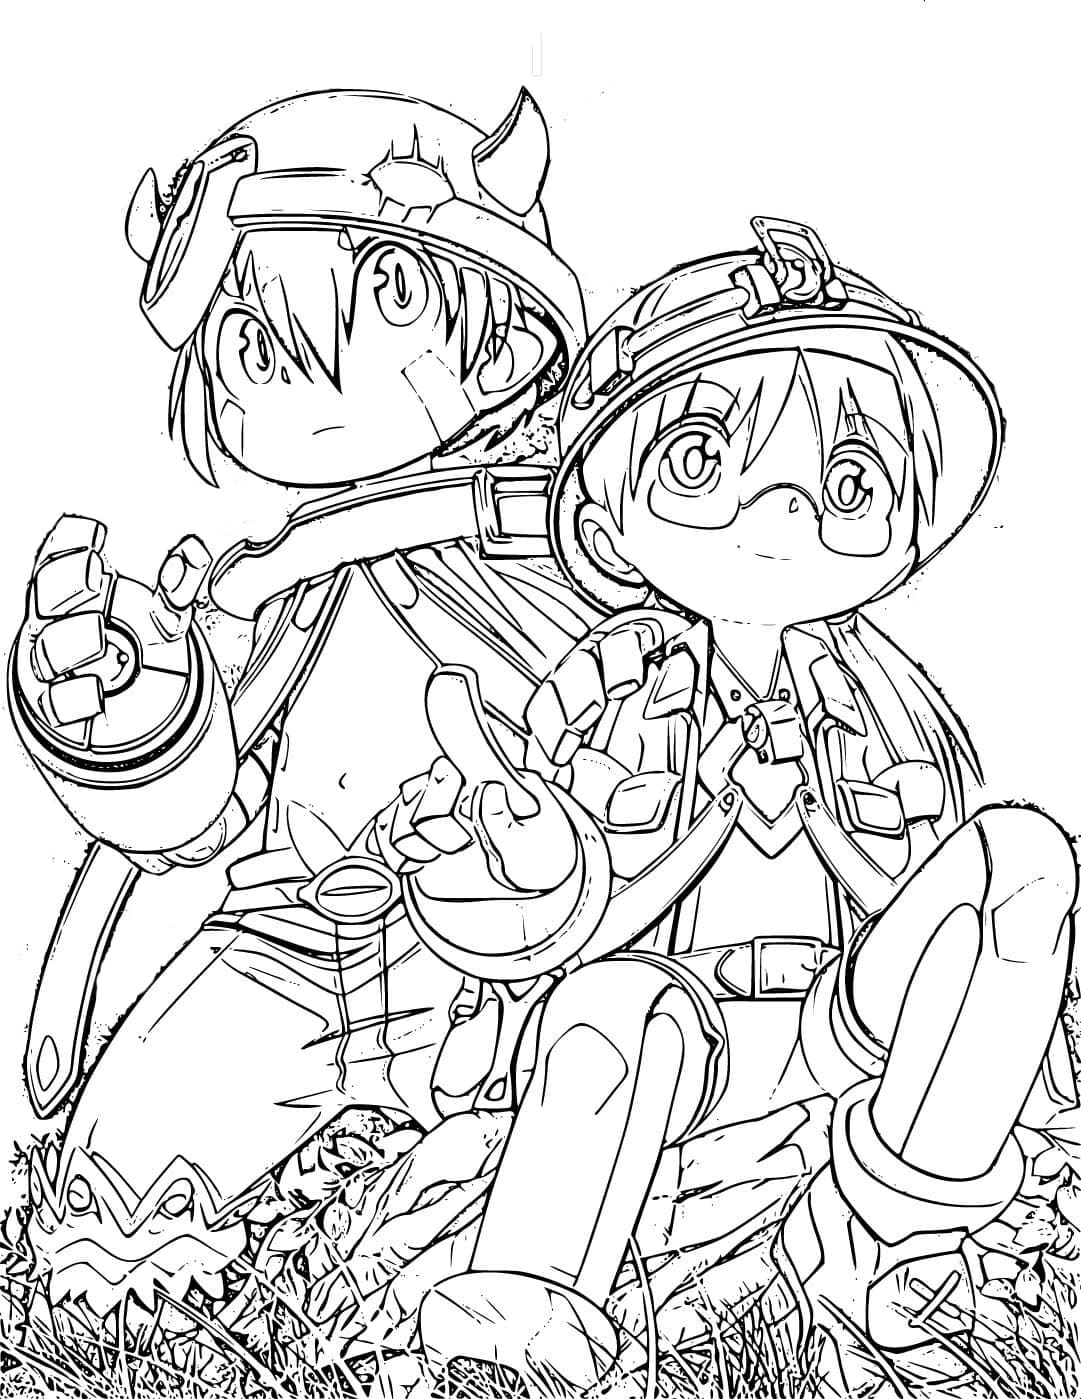 Reg and Riko from Made in Abyss